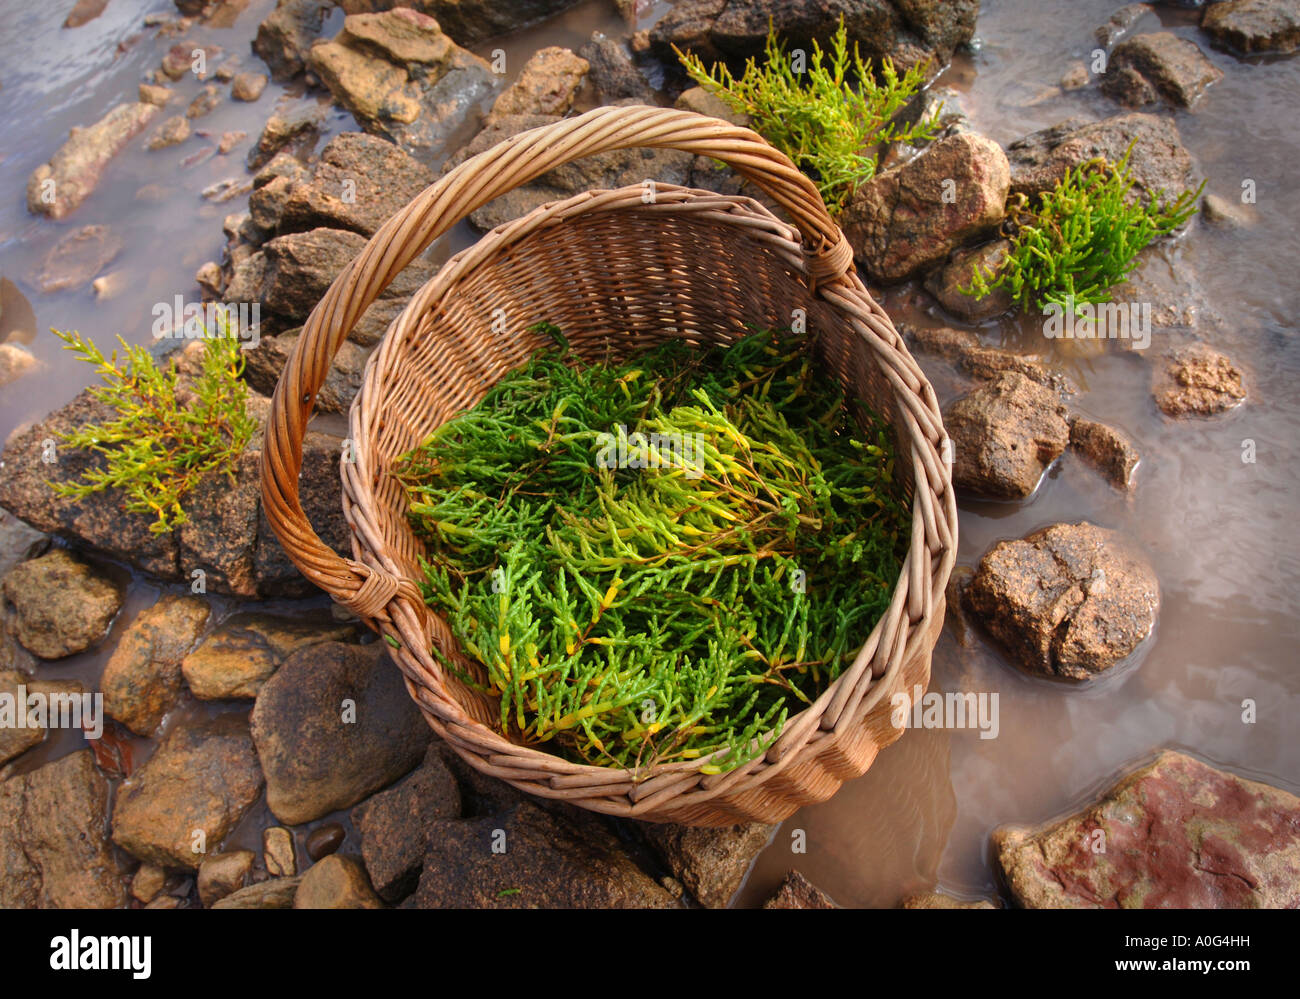 THE EDIBLE SEA WEED SAMPHIRE ON THE BANKS OF THE RIVER SEVERN WITH FORAGING EXPERT RAOUL VAN DEN BROUCKE Stock Photo